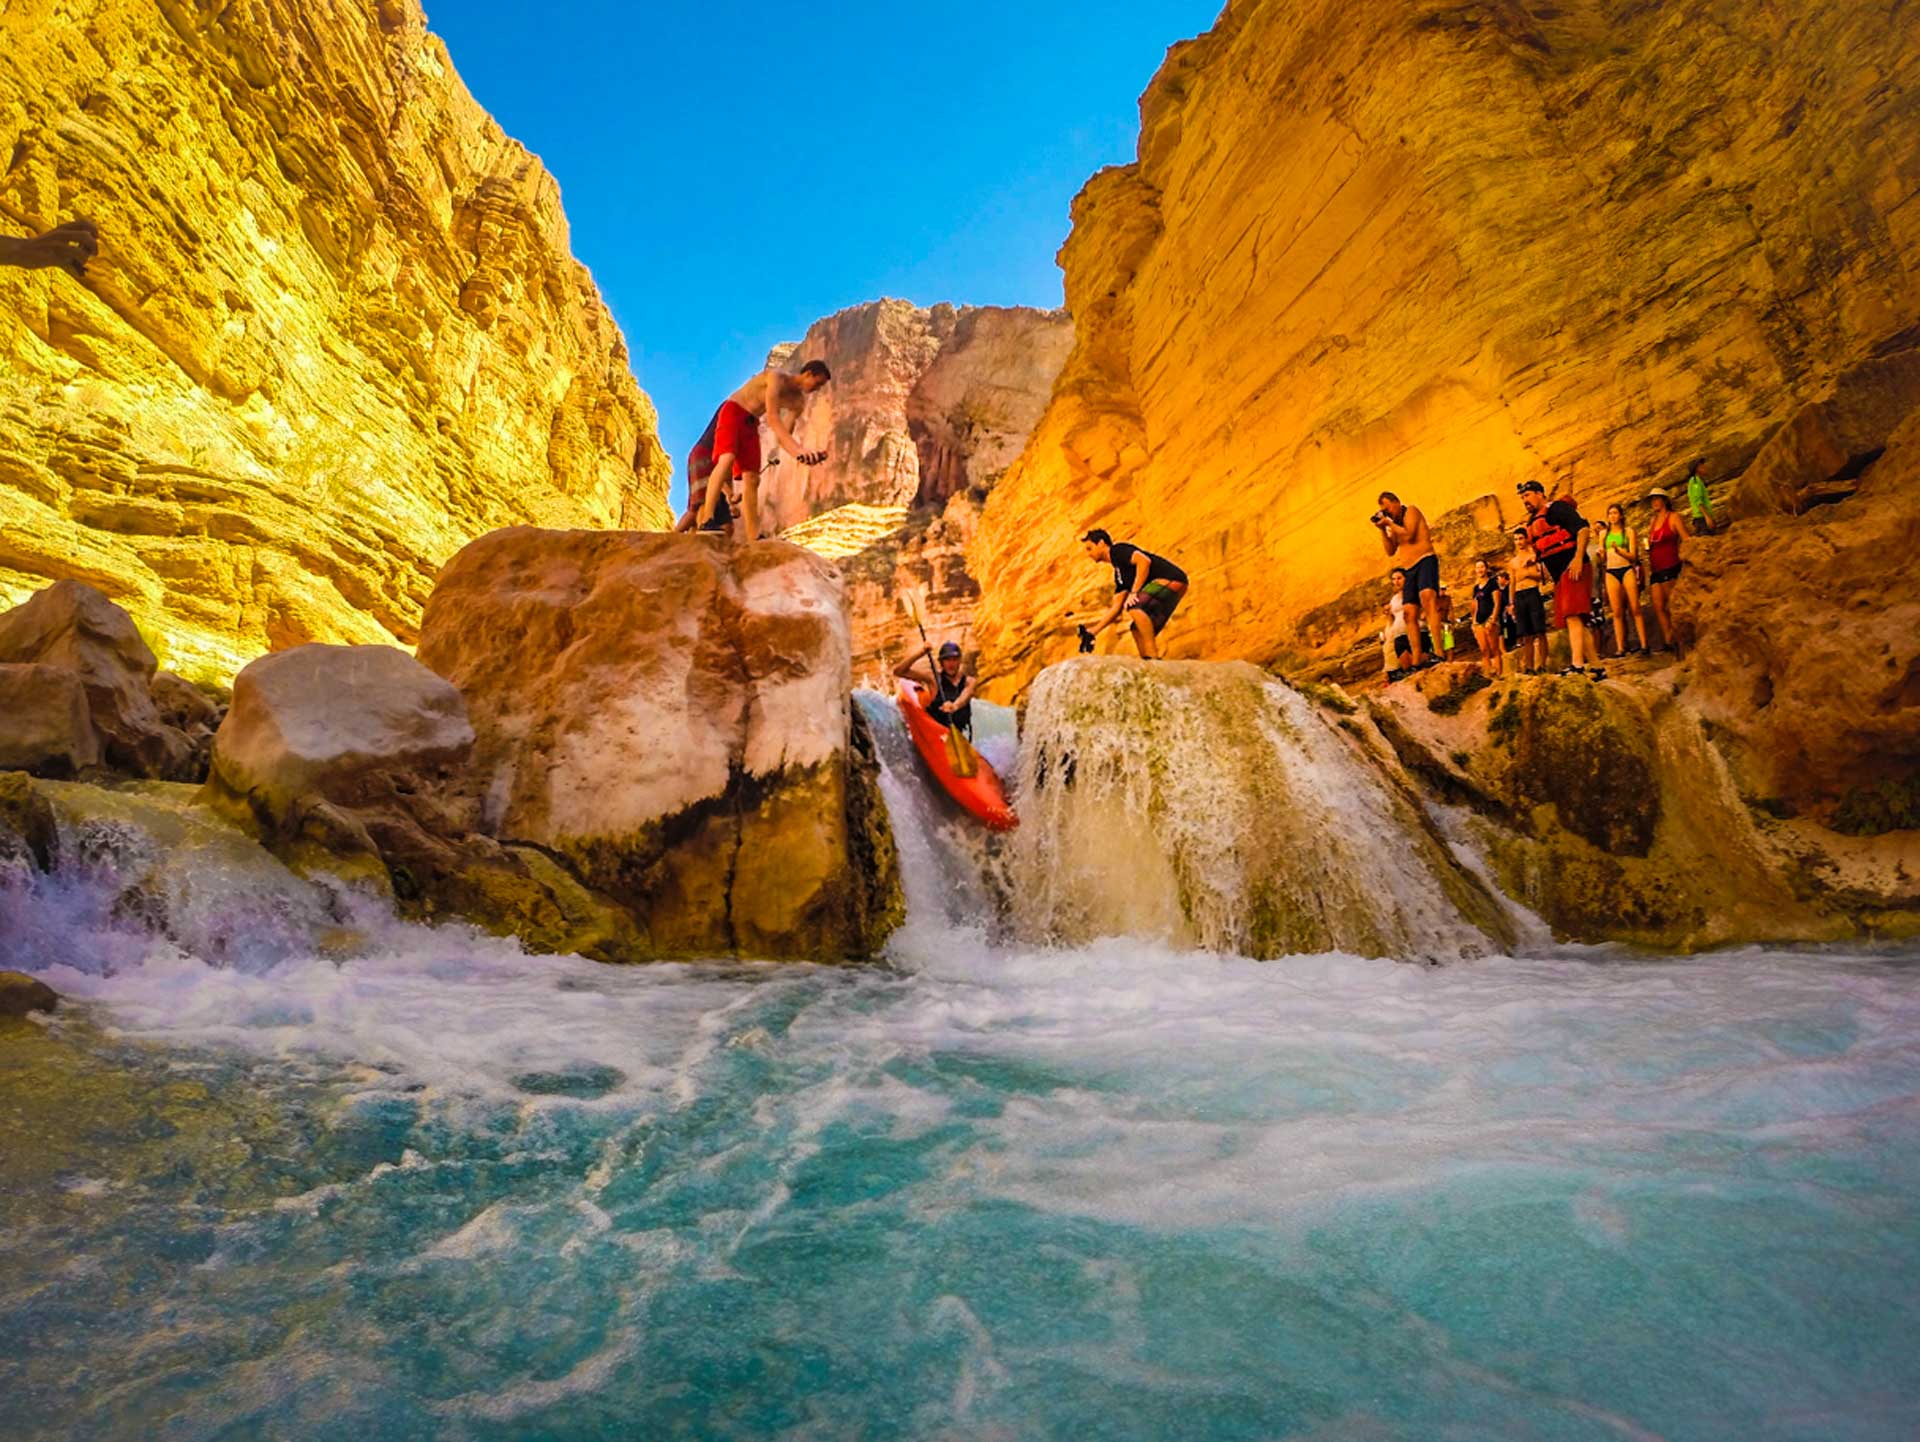 A group of people watching a man kayak during a whitewater rafting trip on the Colorado river in Grand Canyon National Park, Arizona.